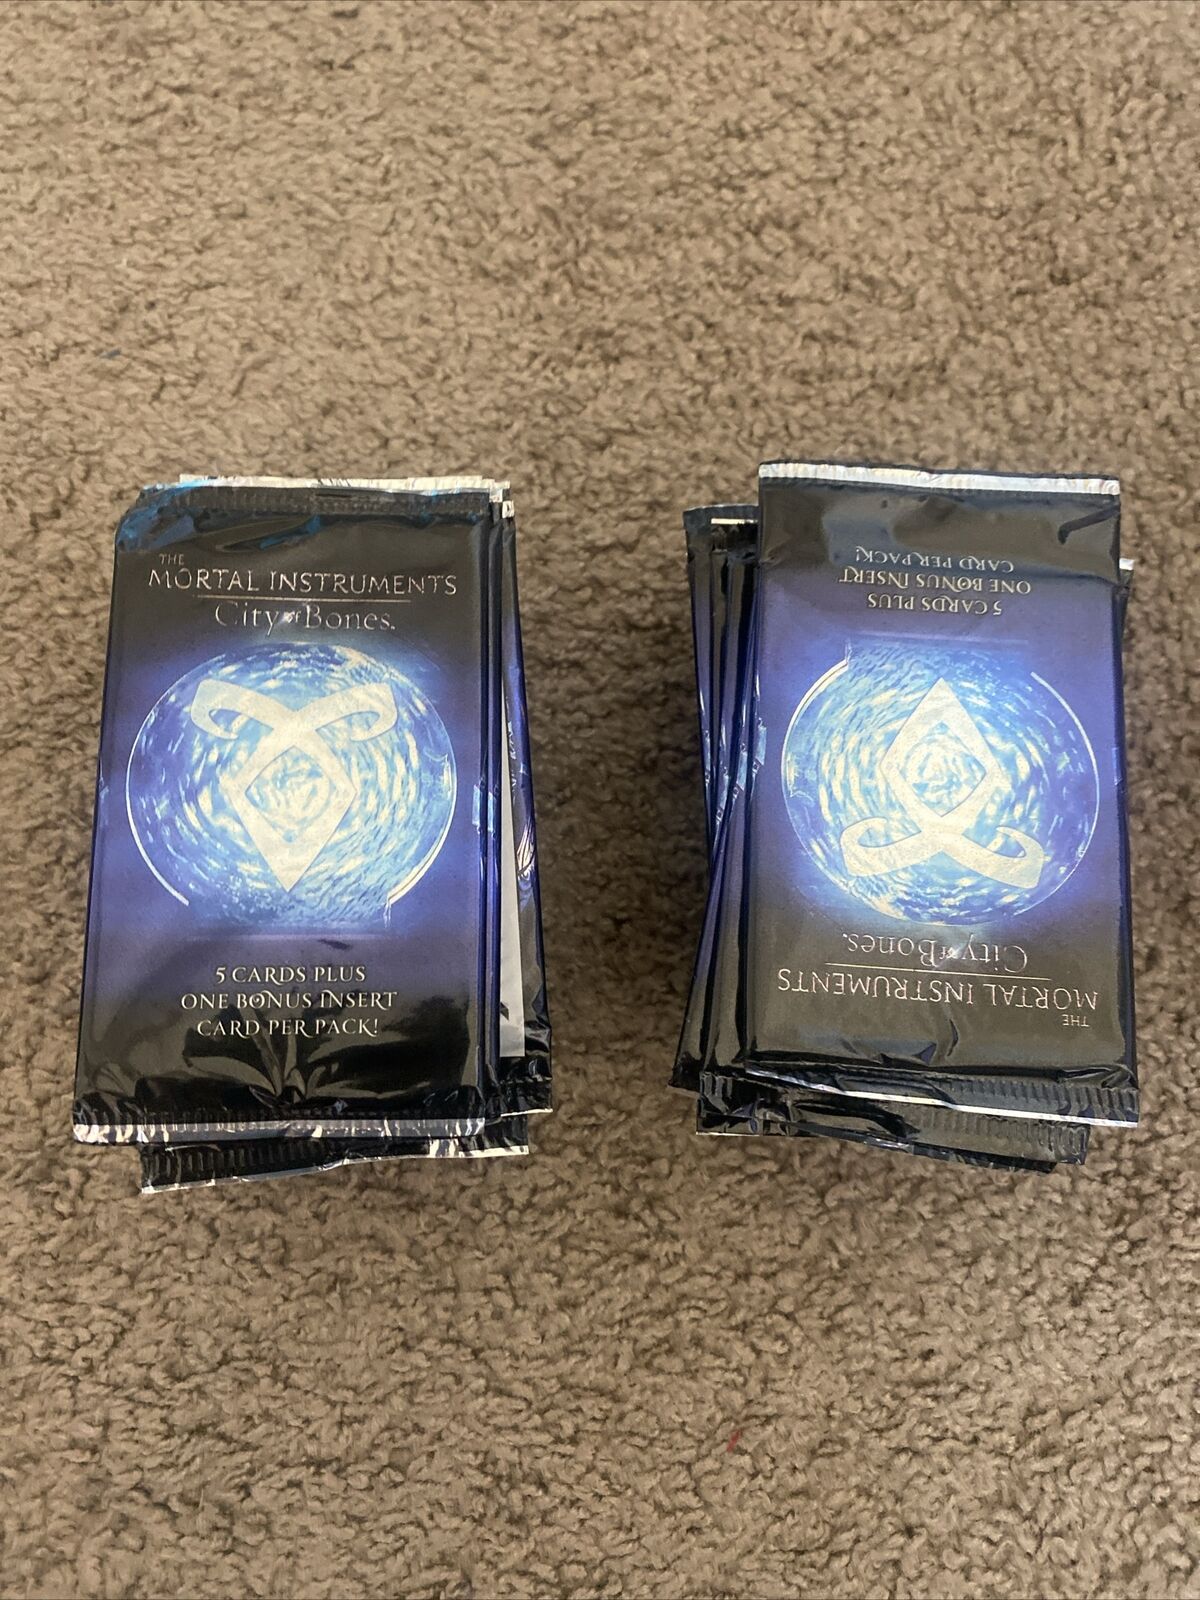 50 Factory Sealed packs The Mortal Instruments City of Bones Trading card packs